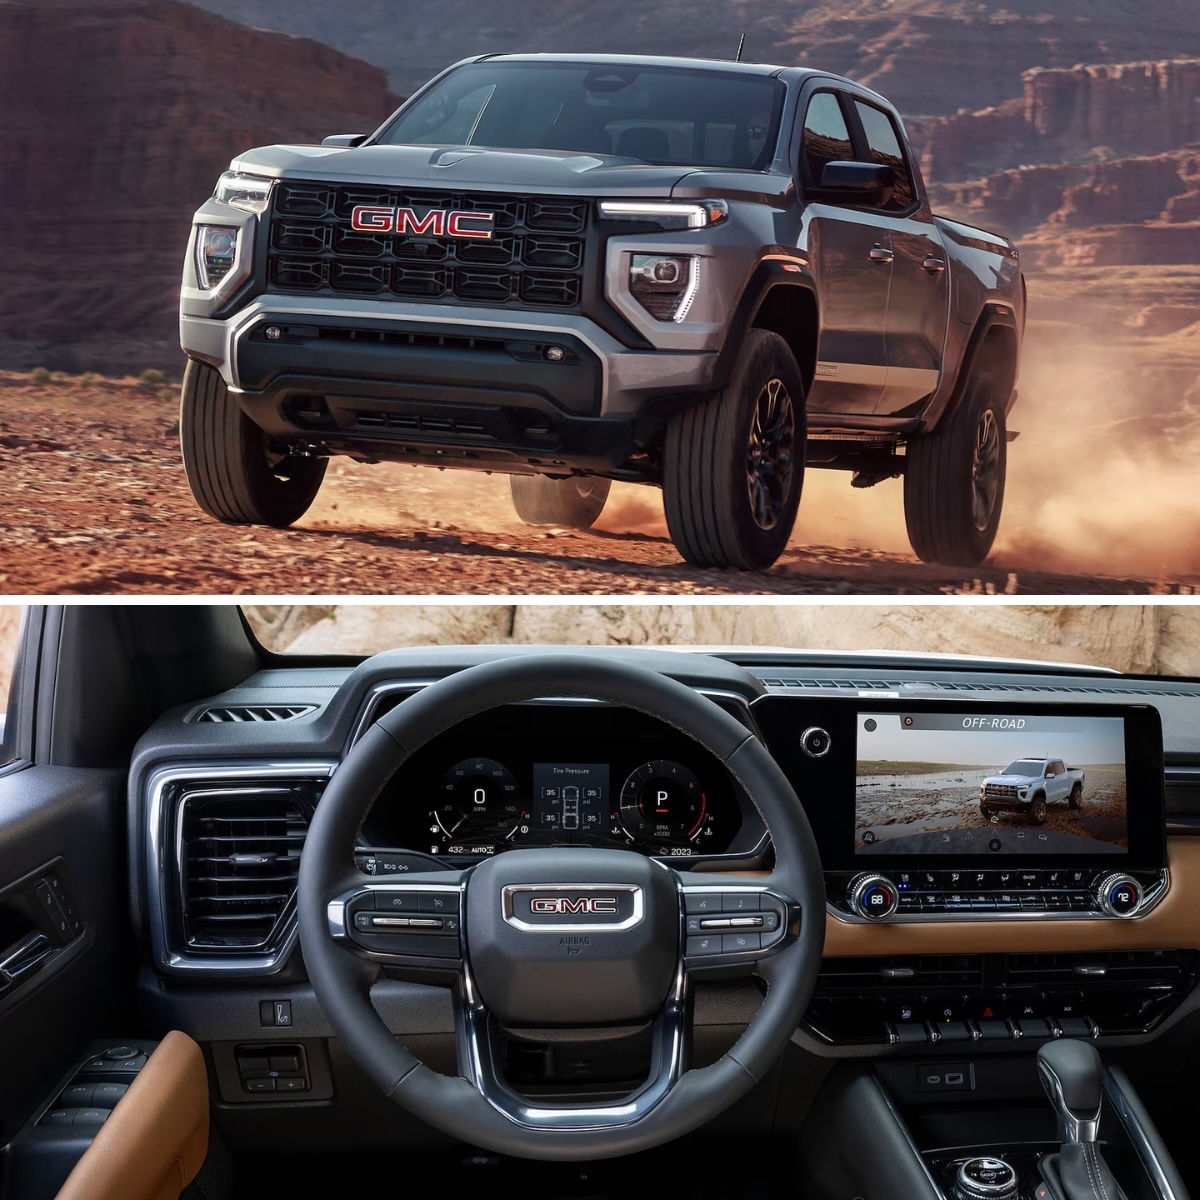 Let the 2024 #GMCCanyon be your ticket to adventure this season. Feel confident behind the wheel of this truck with its bold presence and powerful performance! Visit us today to take off with your new ride and see where it can take you! #CarCrushWednesday #GMC #GMCUSA